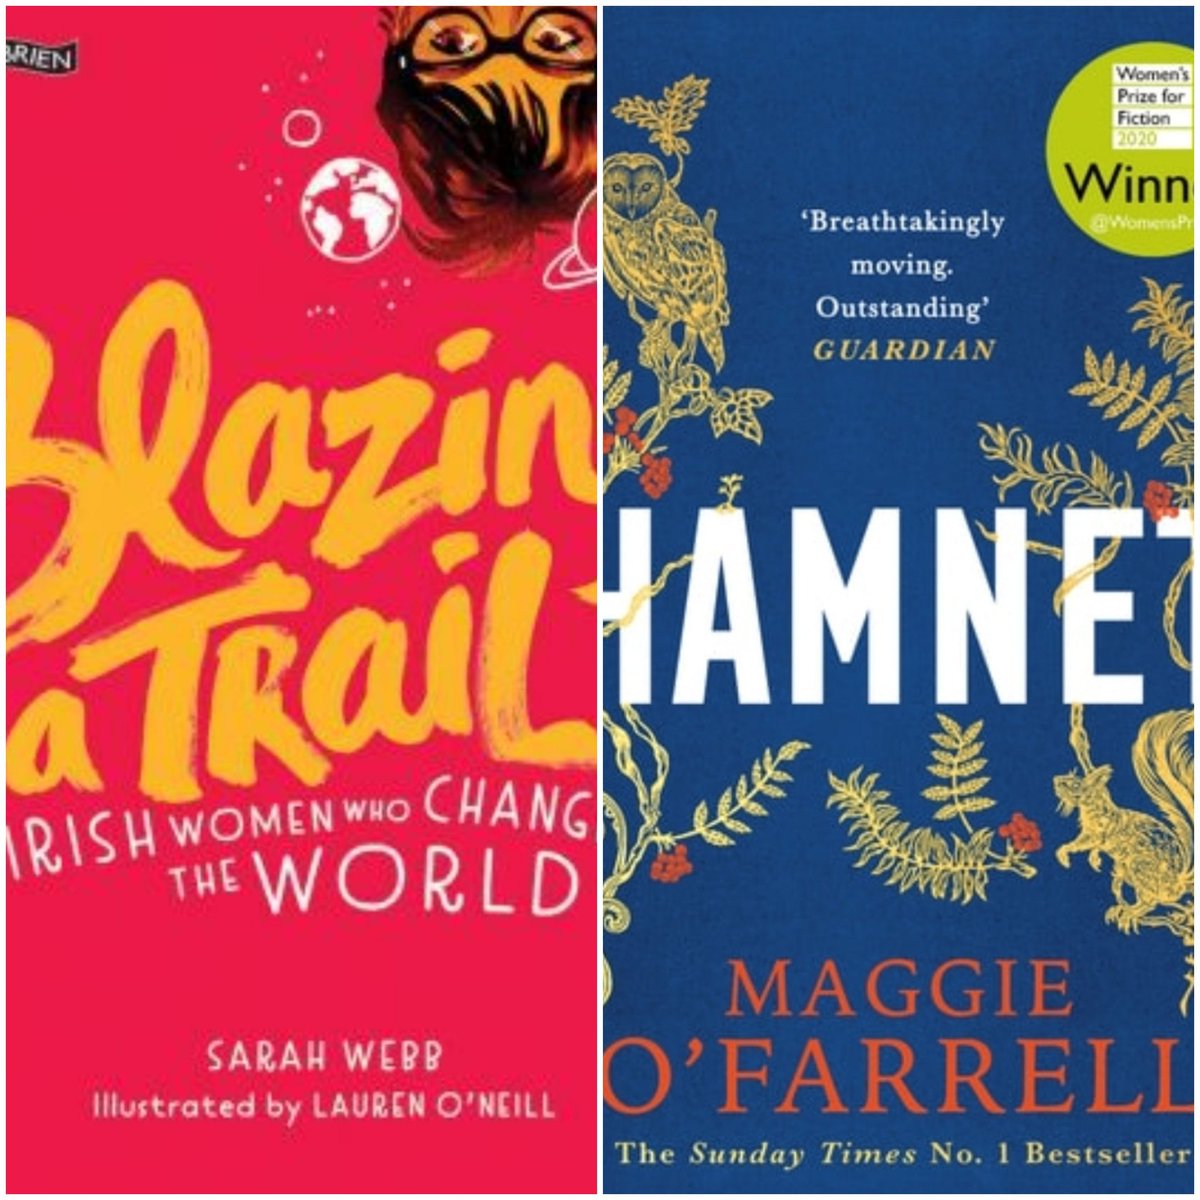 Day 28 of #ReadIrishWomenChallenge24 . A book about a person from real life. For younger readers a book about lots of real Irish women - Blazing a Trail by @sarahwebbishere & illustrated by @oneillustration & for grownups a book about Shakespeare & his family by Maggie O'Farrell.